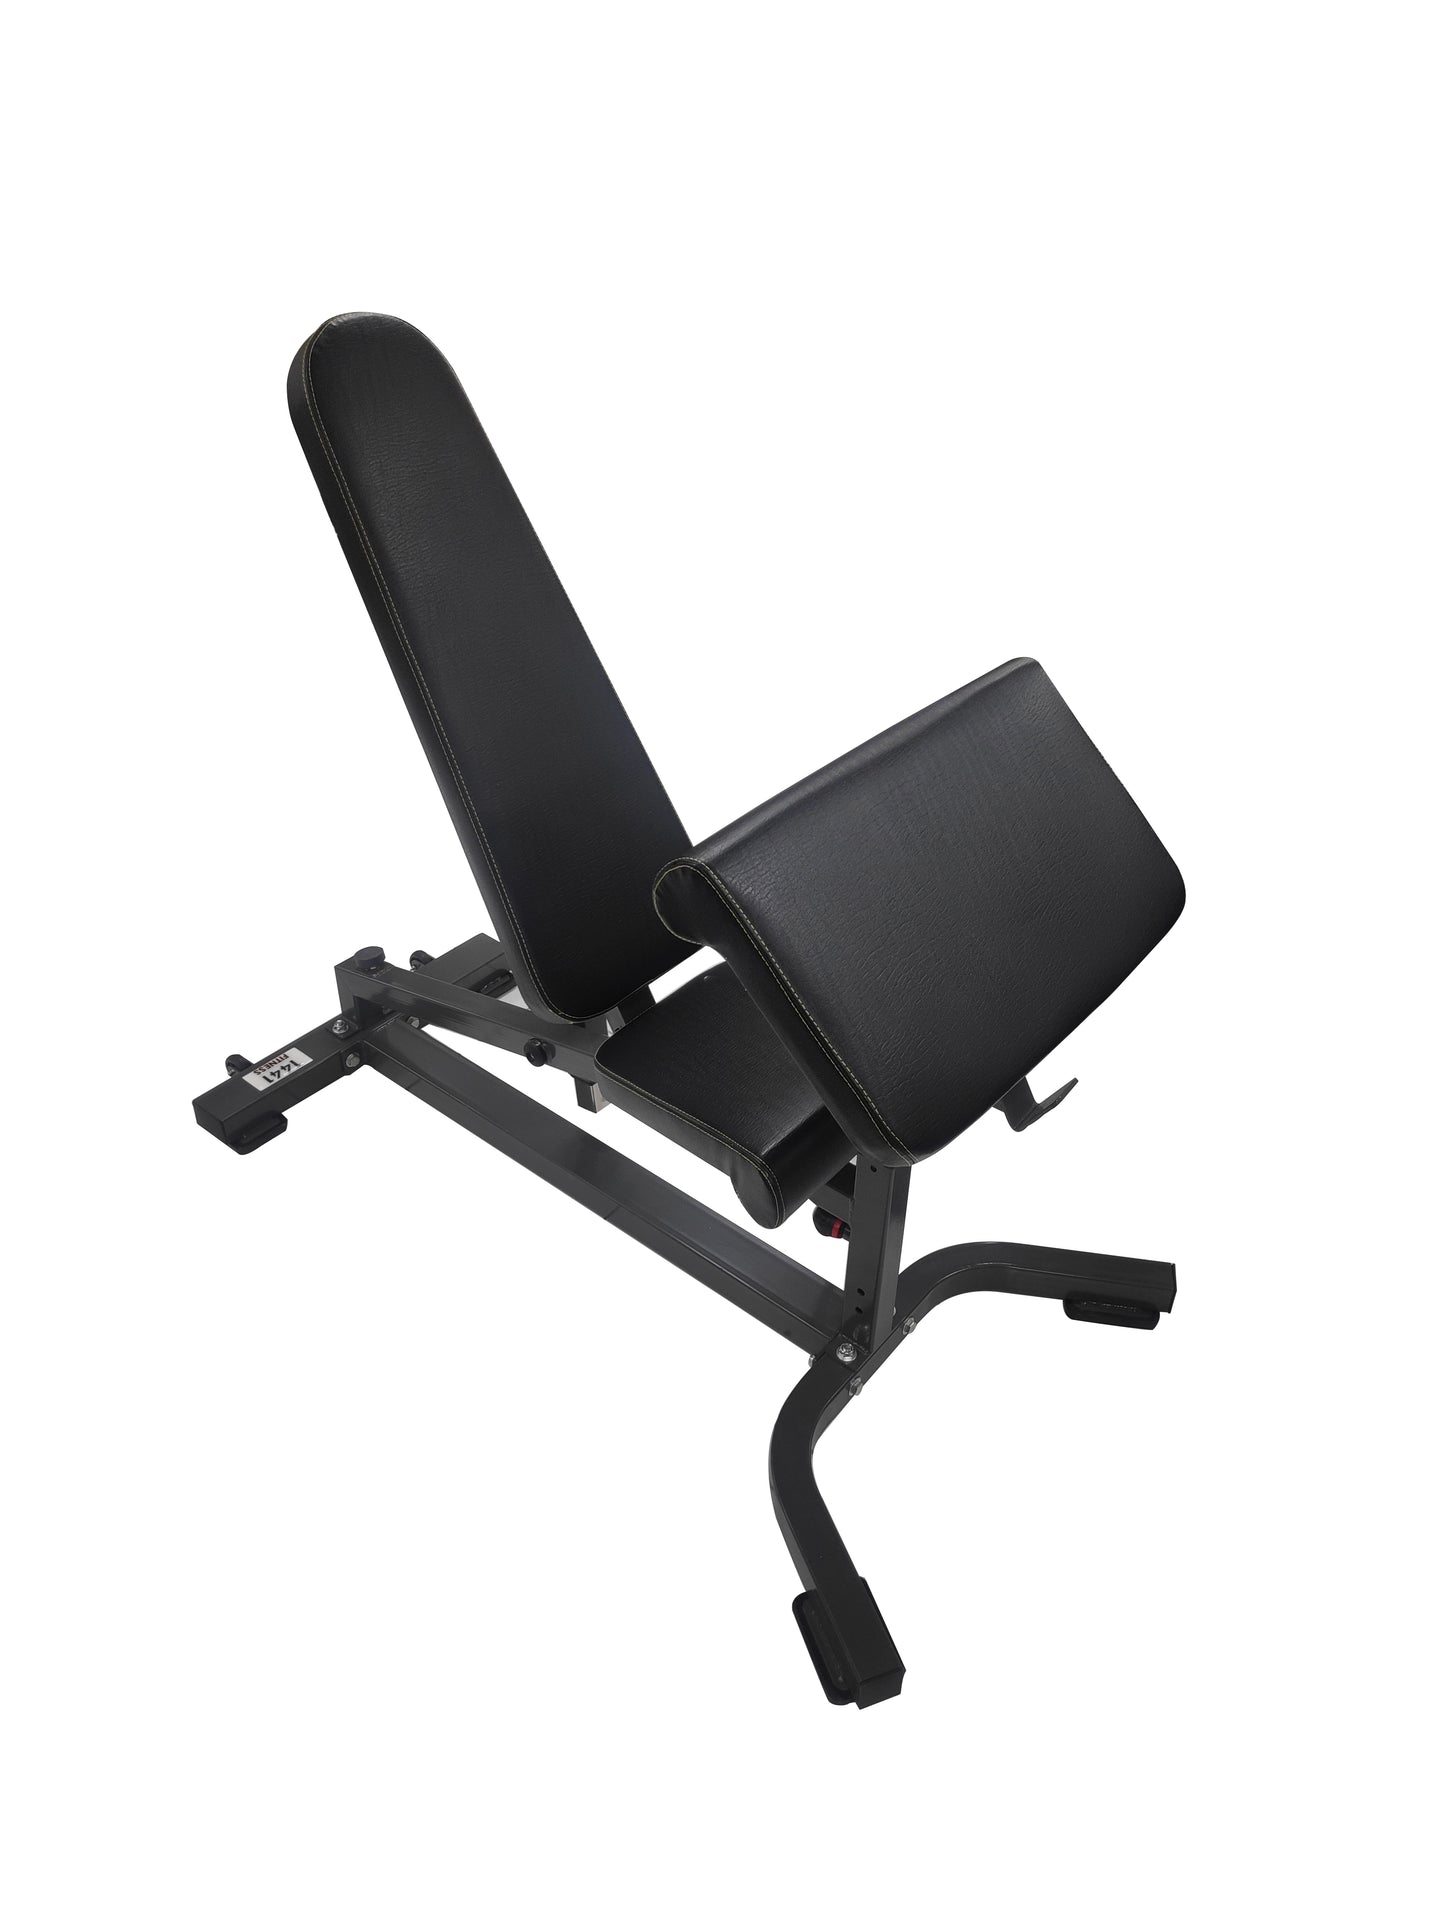 1441 Fitness Adjustable Commercial Bench with Preacher Curl Extension - X3-0112A